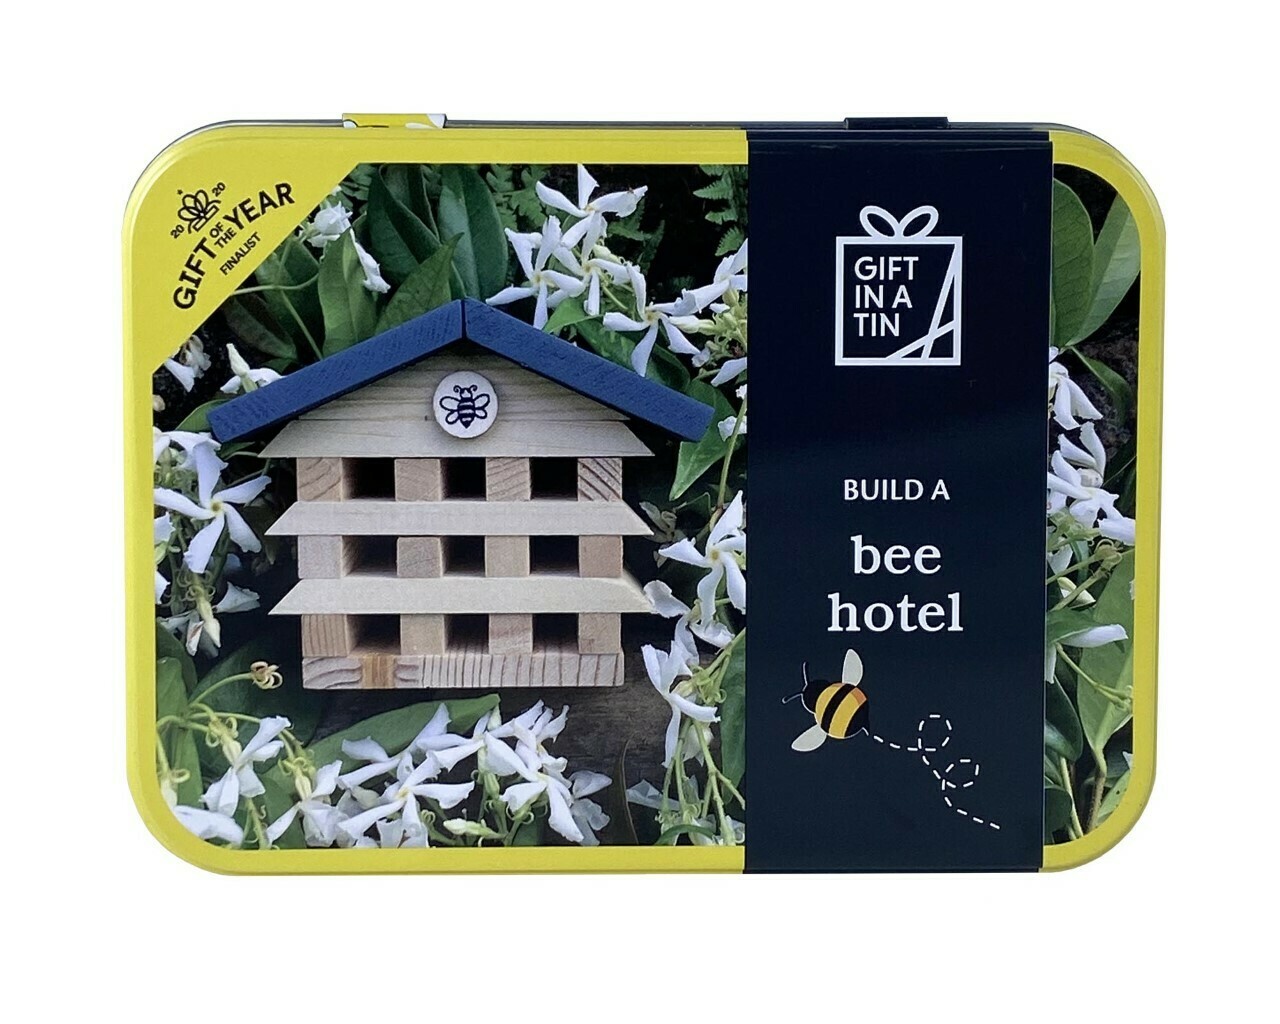 Build a Bee Hotel.